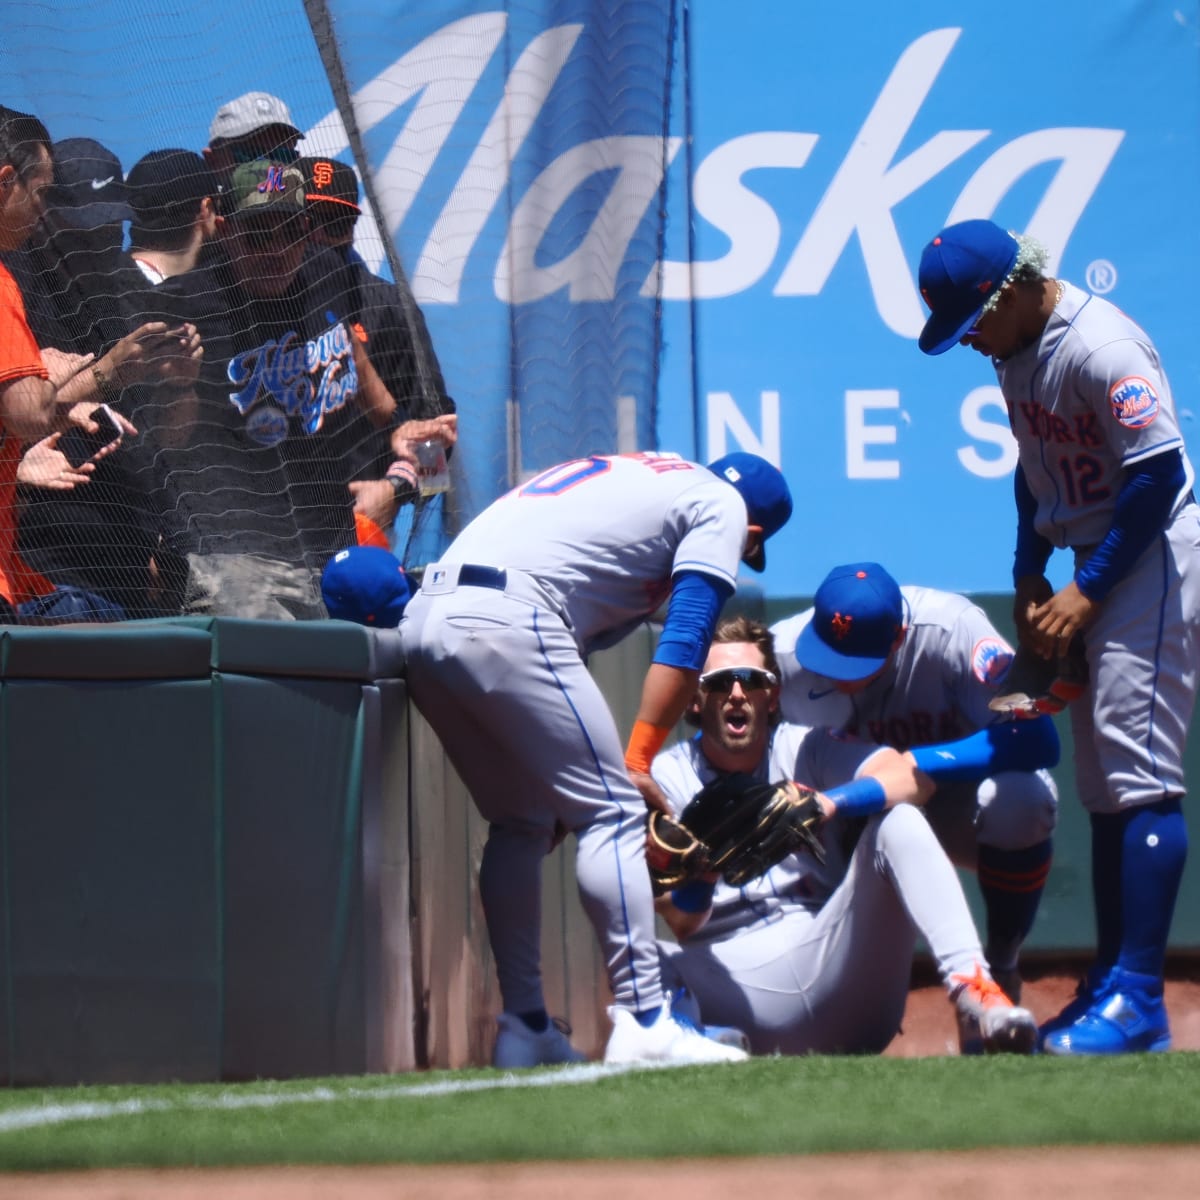 Mets' Jeff McNeil nudging teammate to make due on expensive